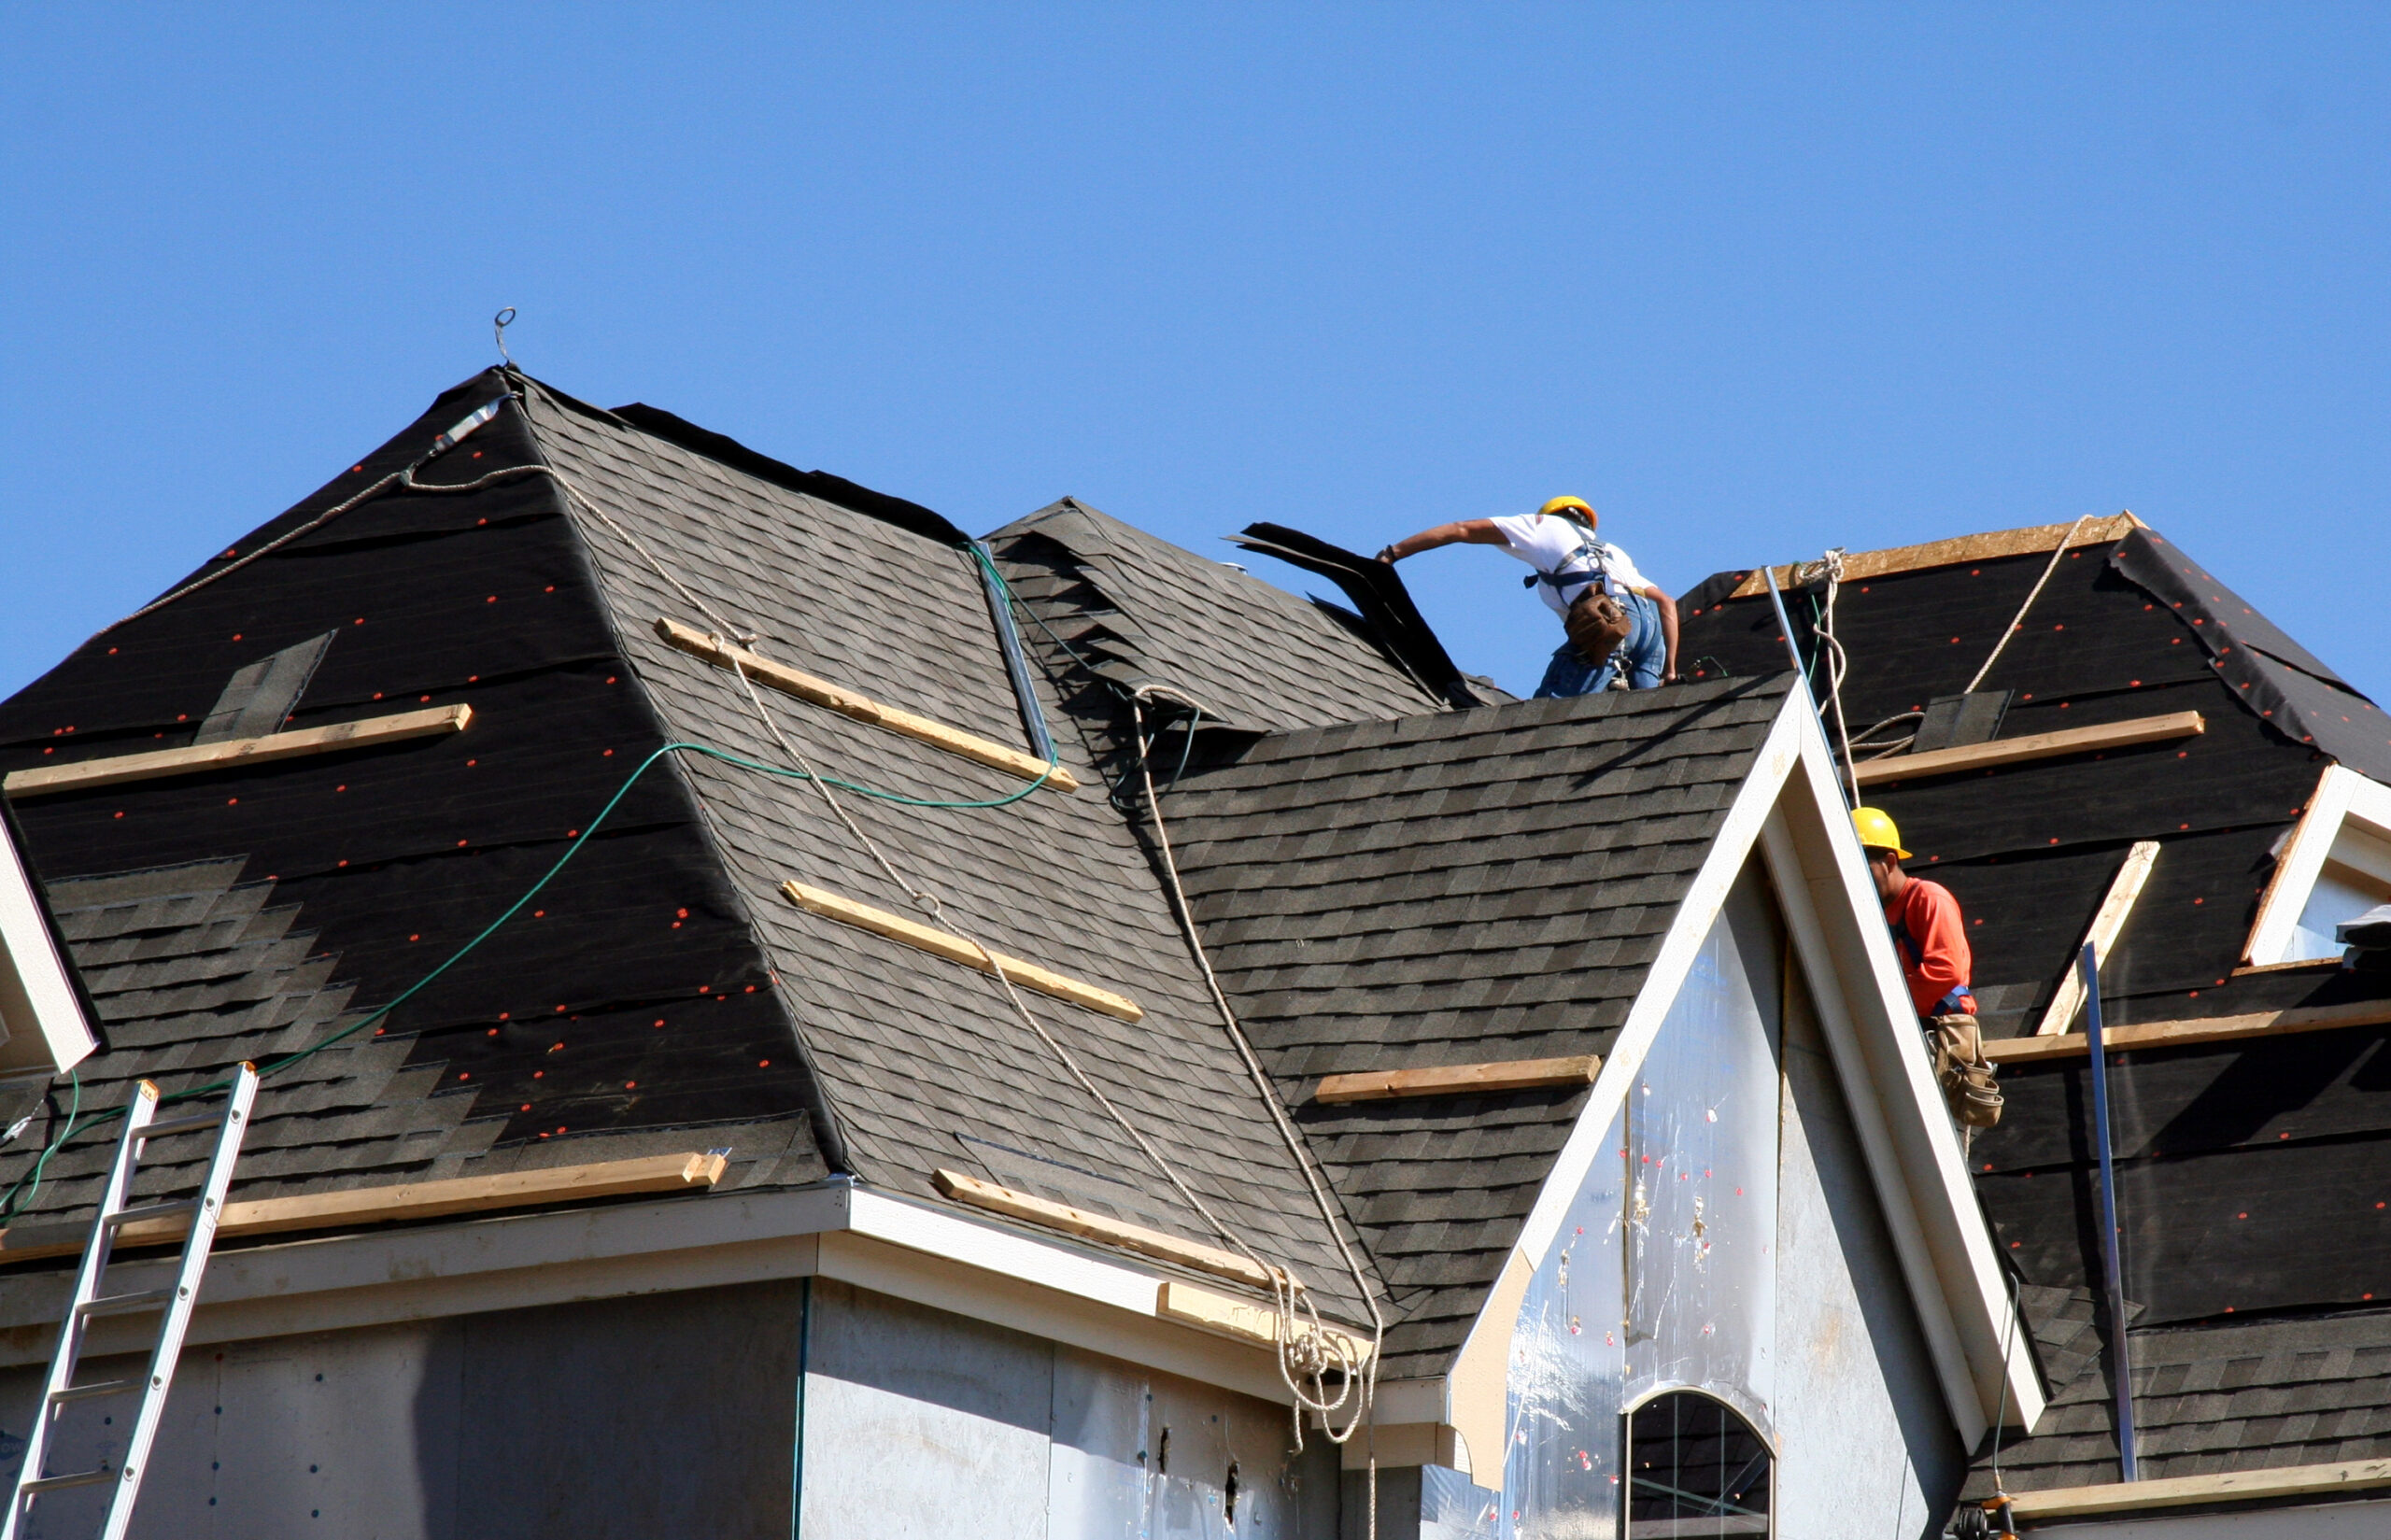 Roofing contractors working on a residential roof